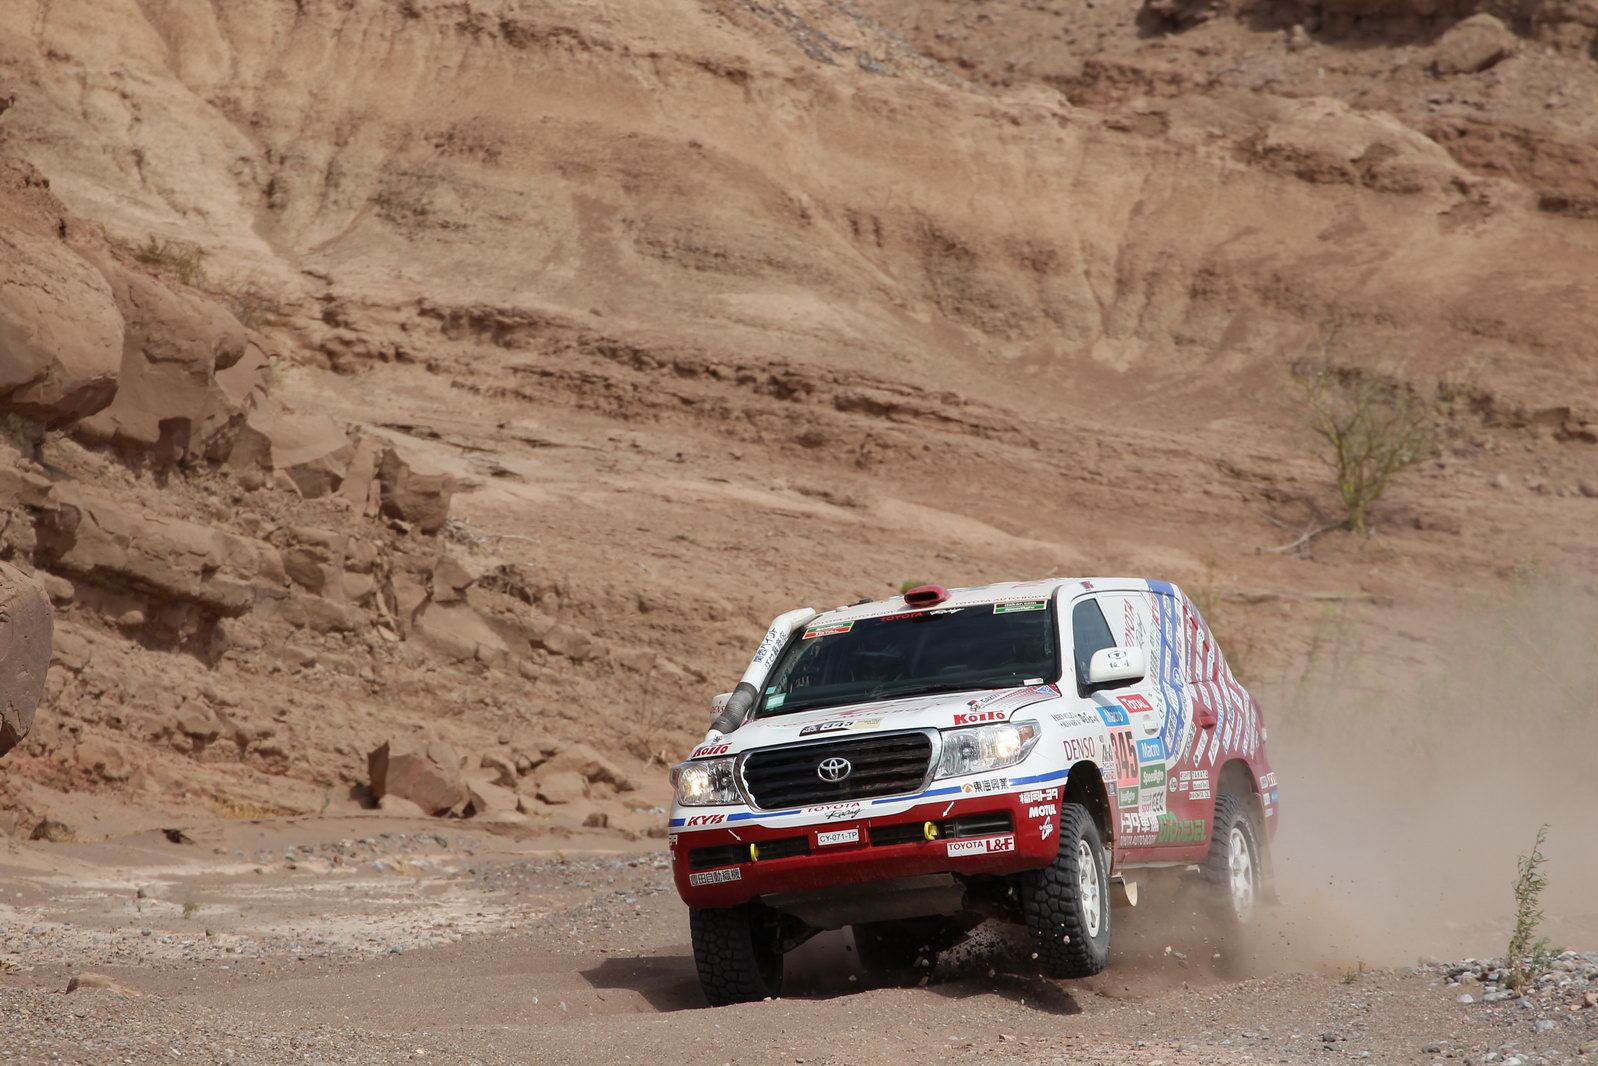 Hiluxes again finish the stage 2nd and 3rd